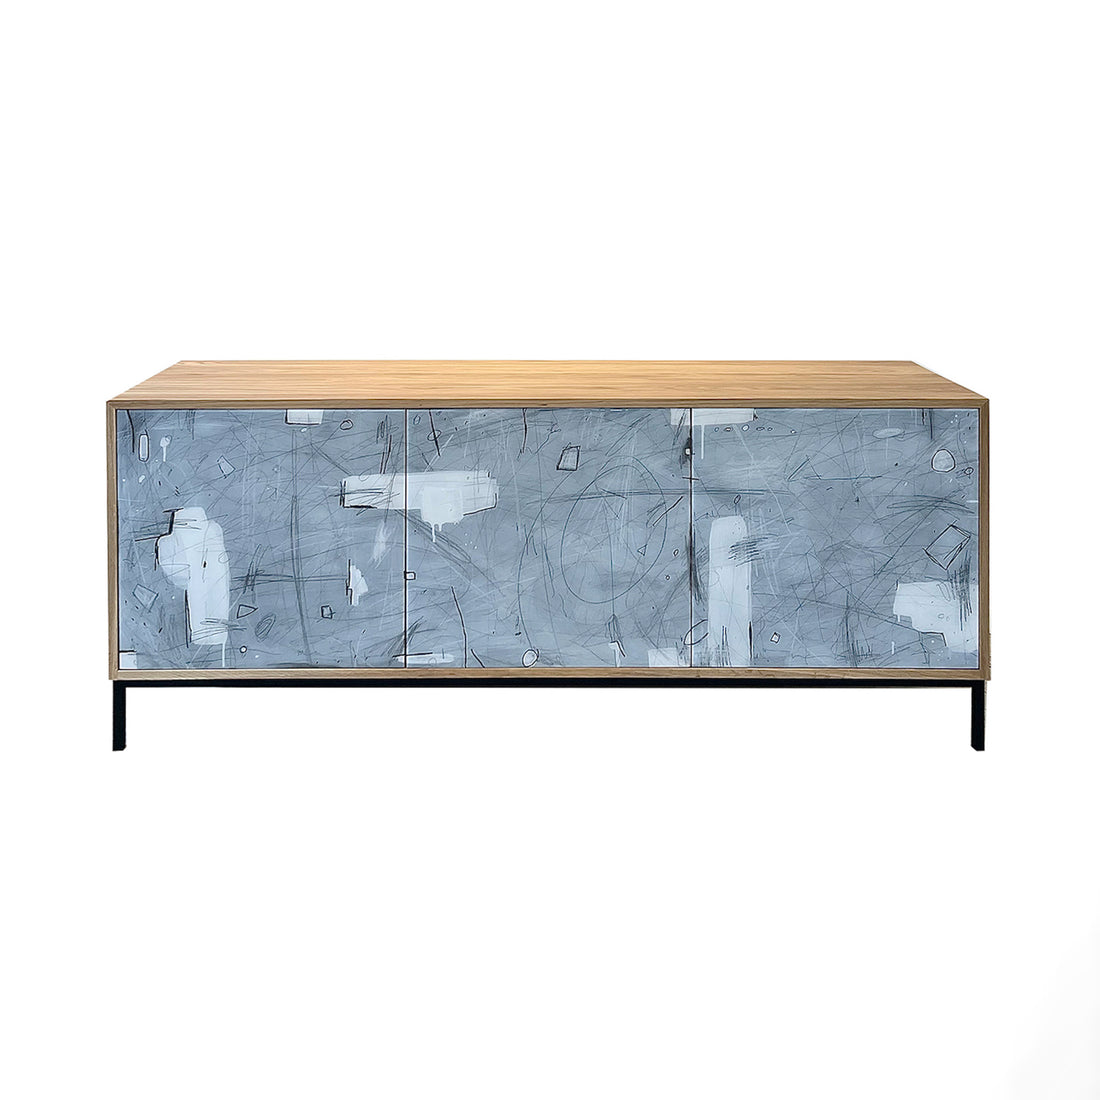 Abstract in White Credenza